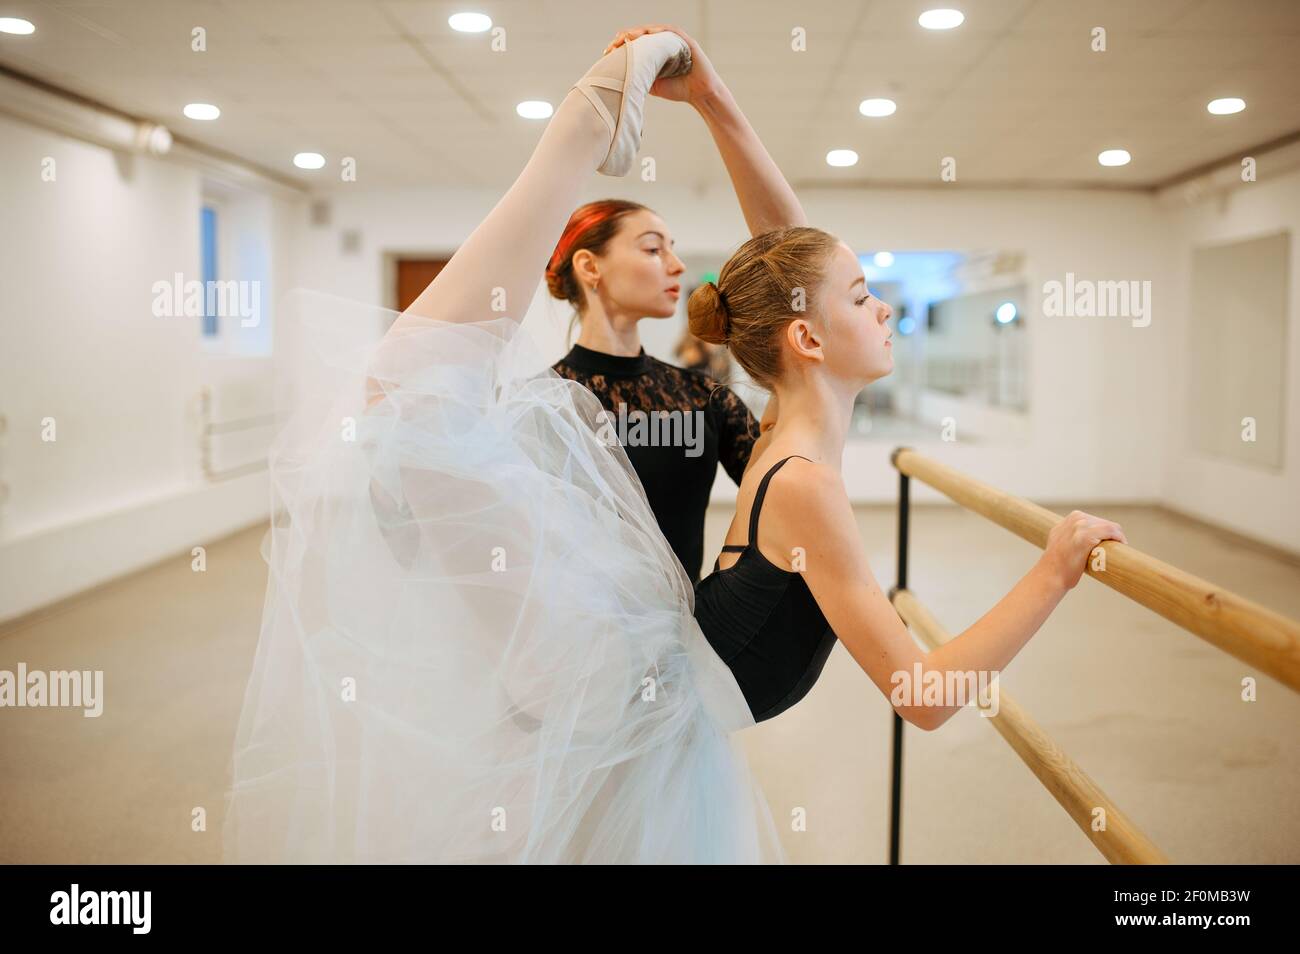 Teacher rehearsing with young ballerina at barre Stock Photo